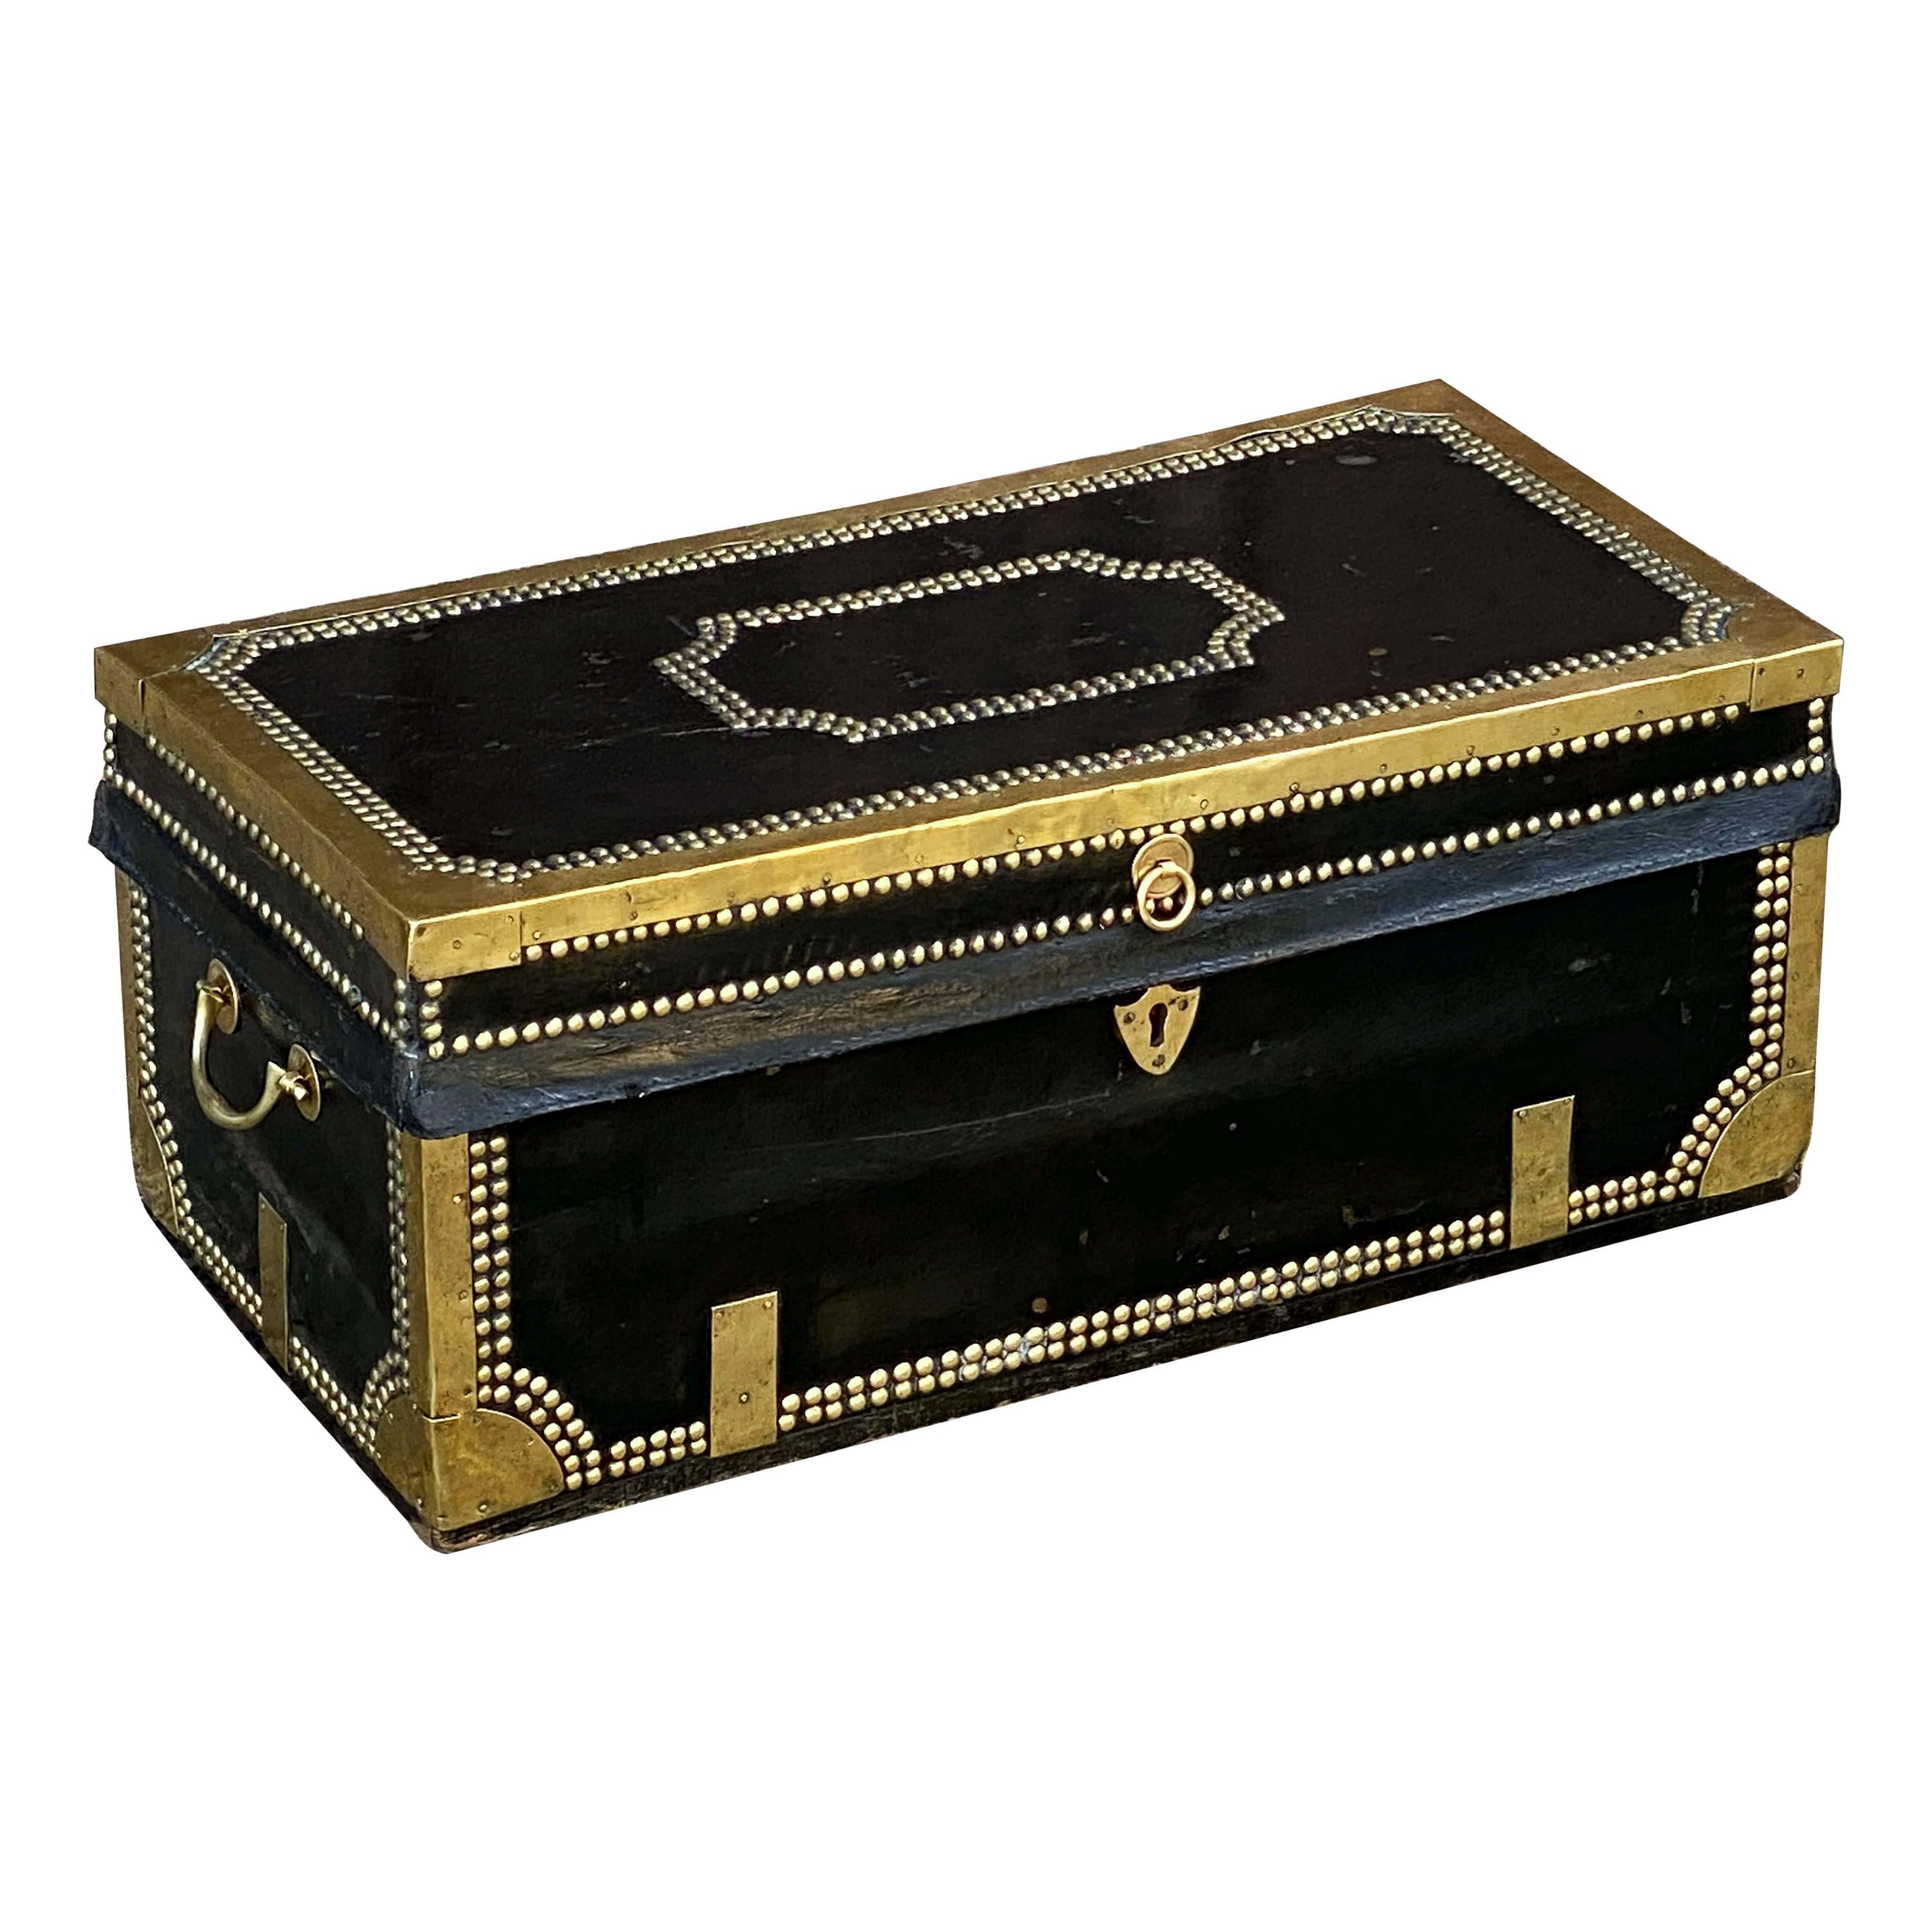 English Campaign Trunk of Brass-Bound Leather and Camphor Wood, circa 1820